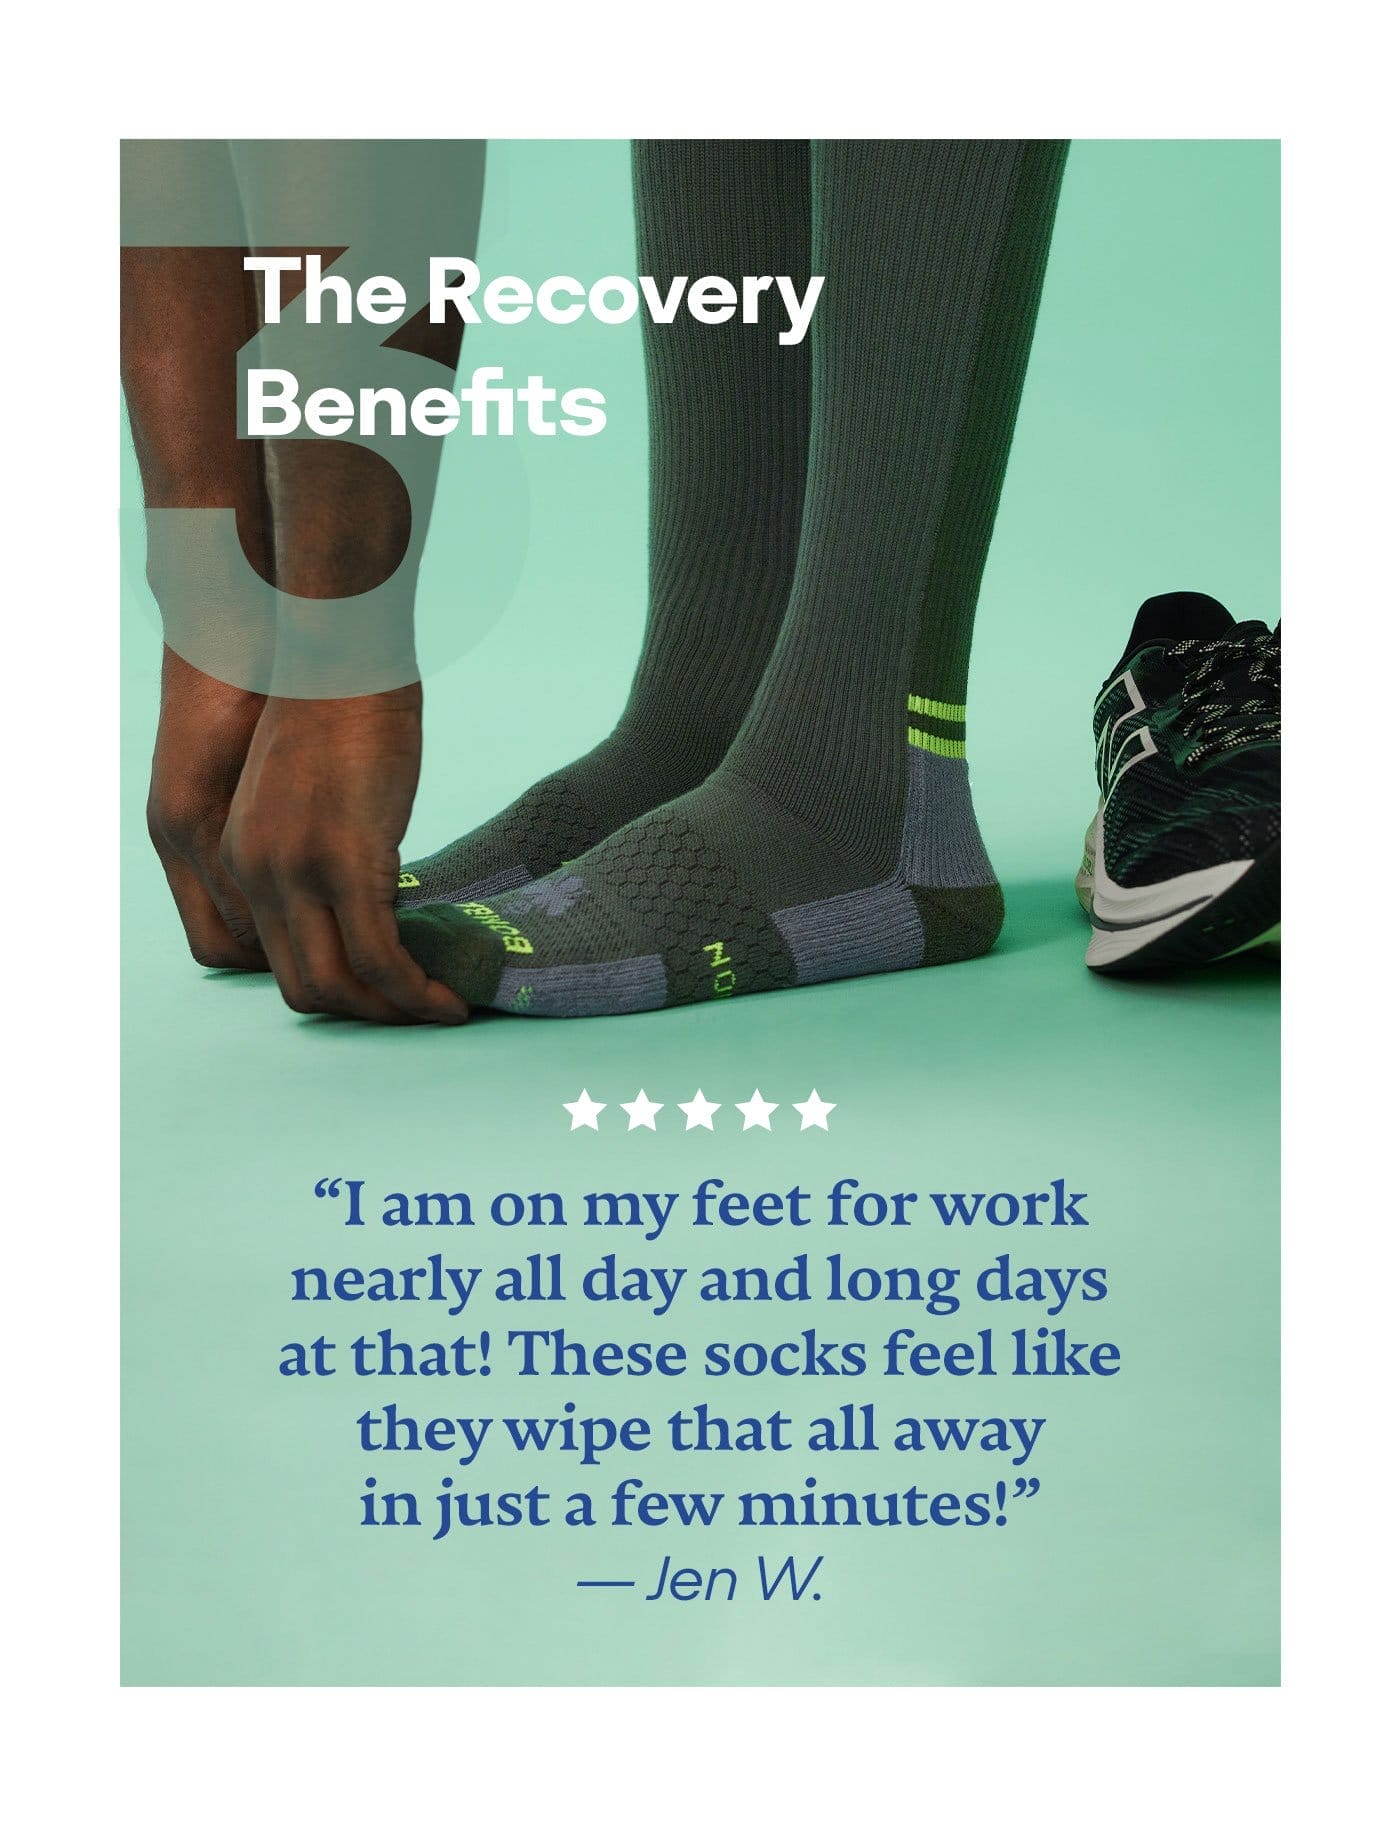 The Recovery Benefits